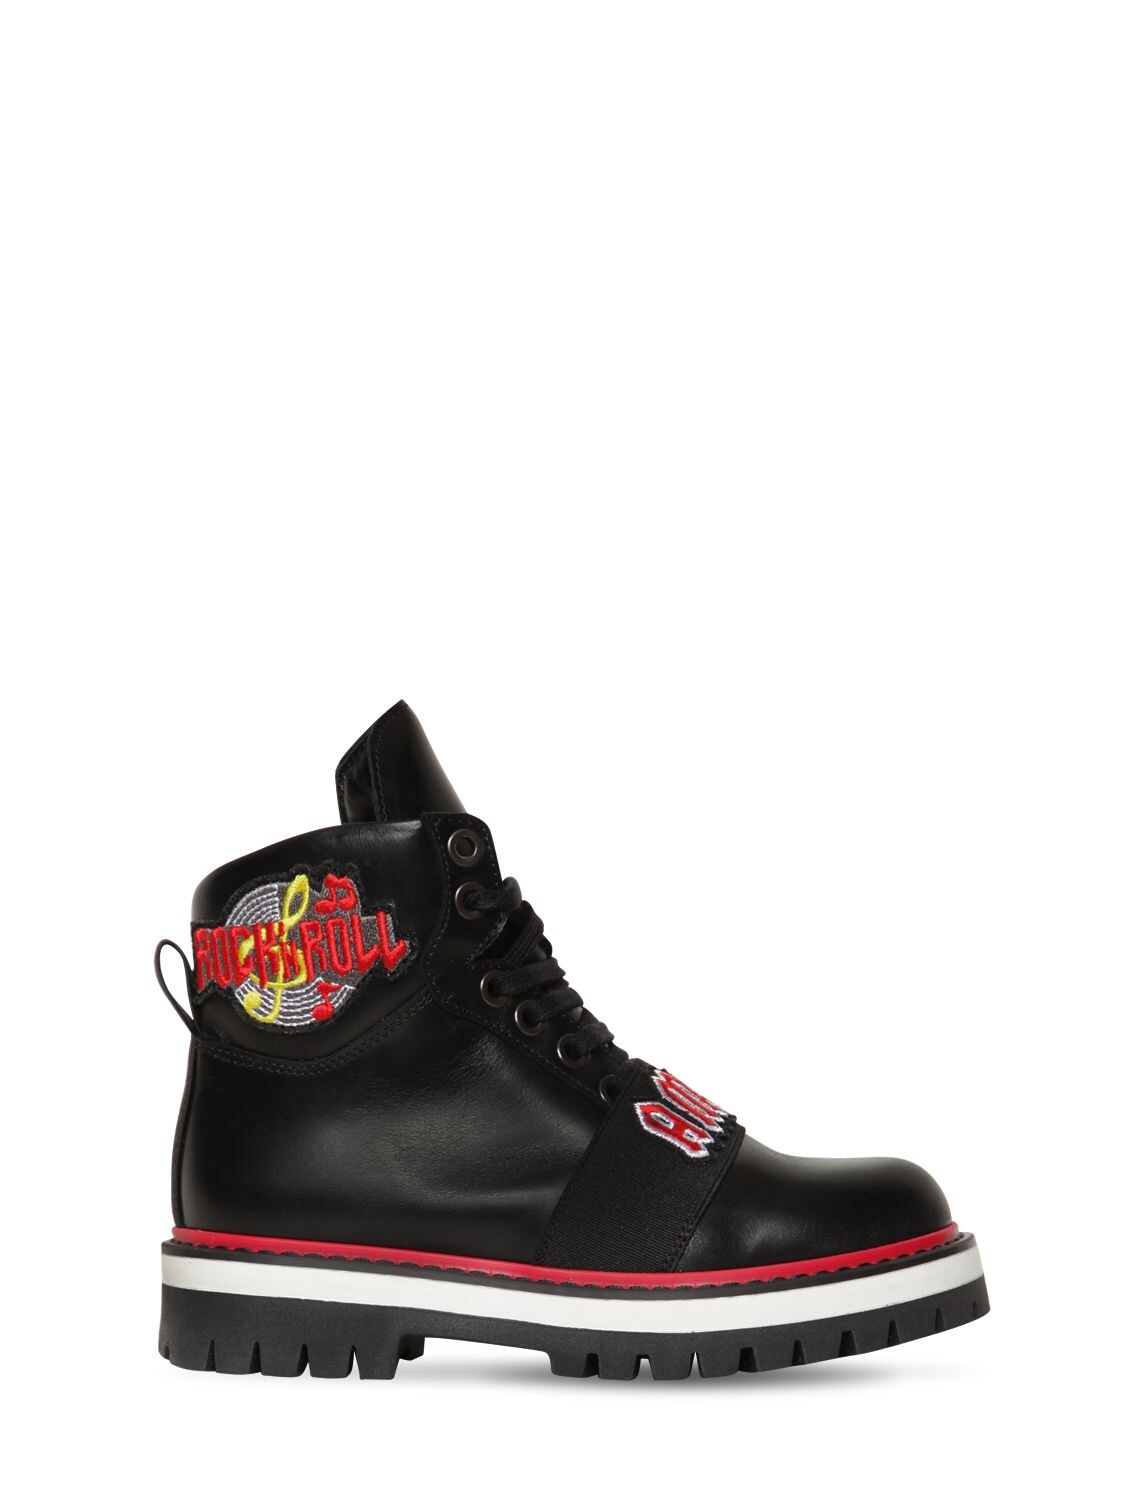 Am 66 Kids' Leather Ankle Boots W/ Patch In Black